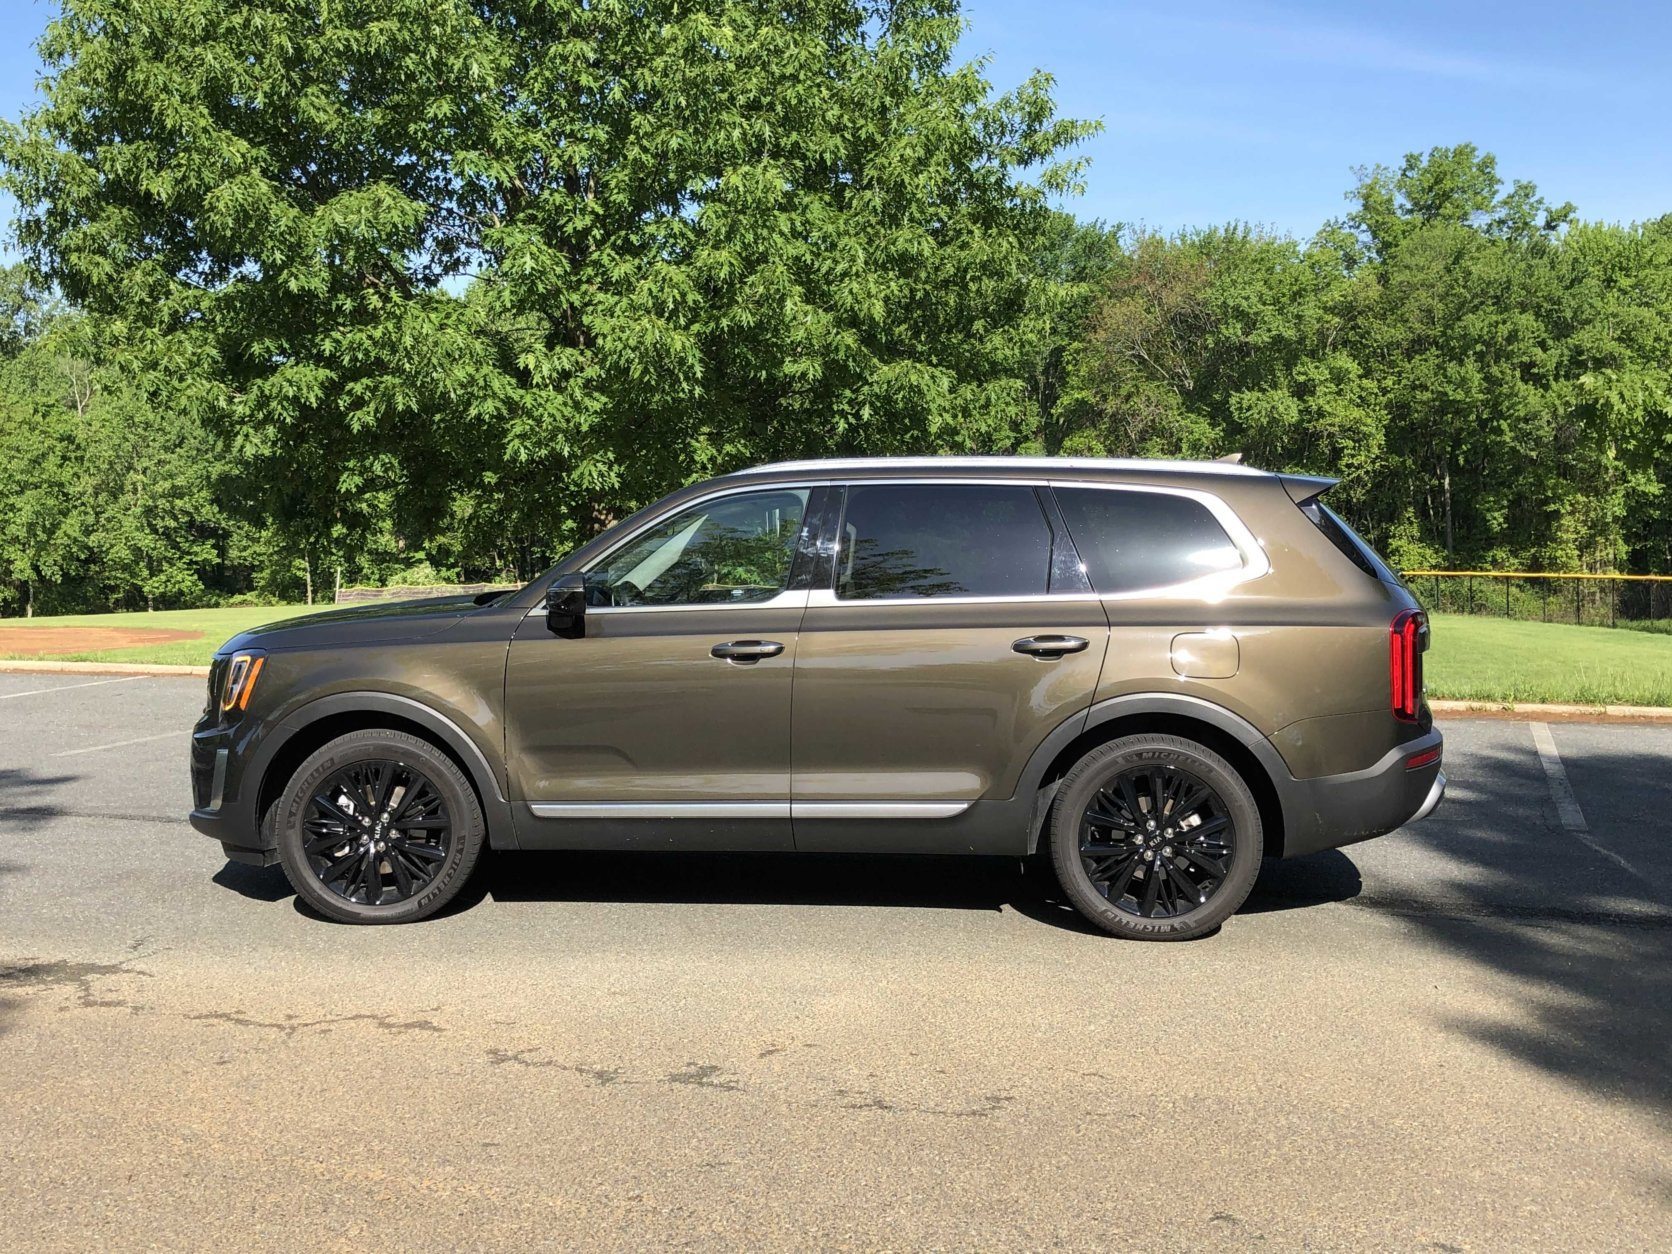 Car Review Kia goes big for its new stylish crossover 2020 Telluride